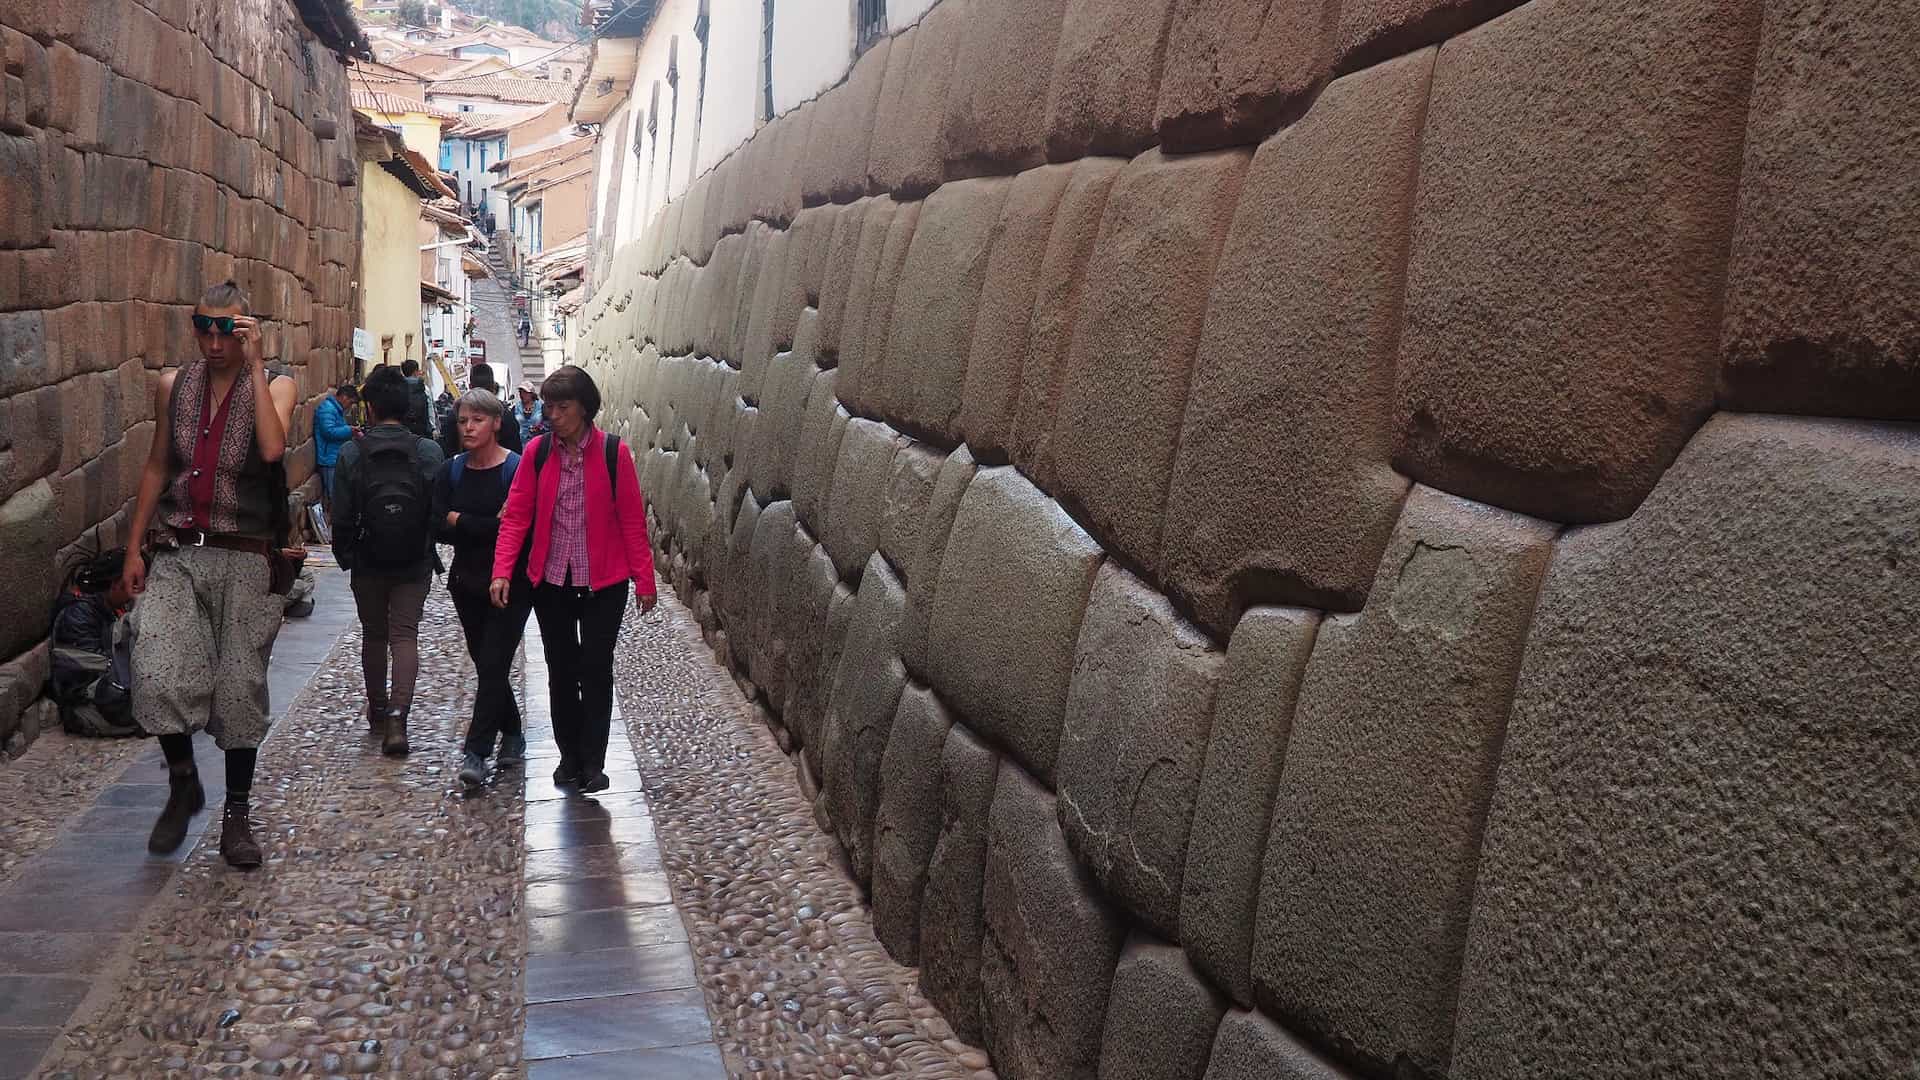 People walking in a narrow street with a large stone wall on the right